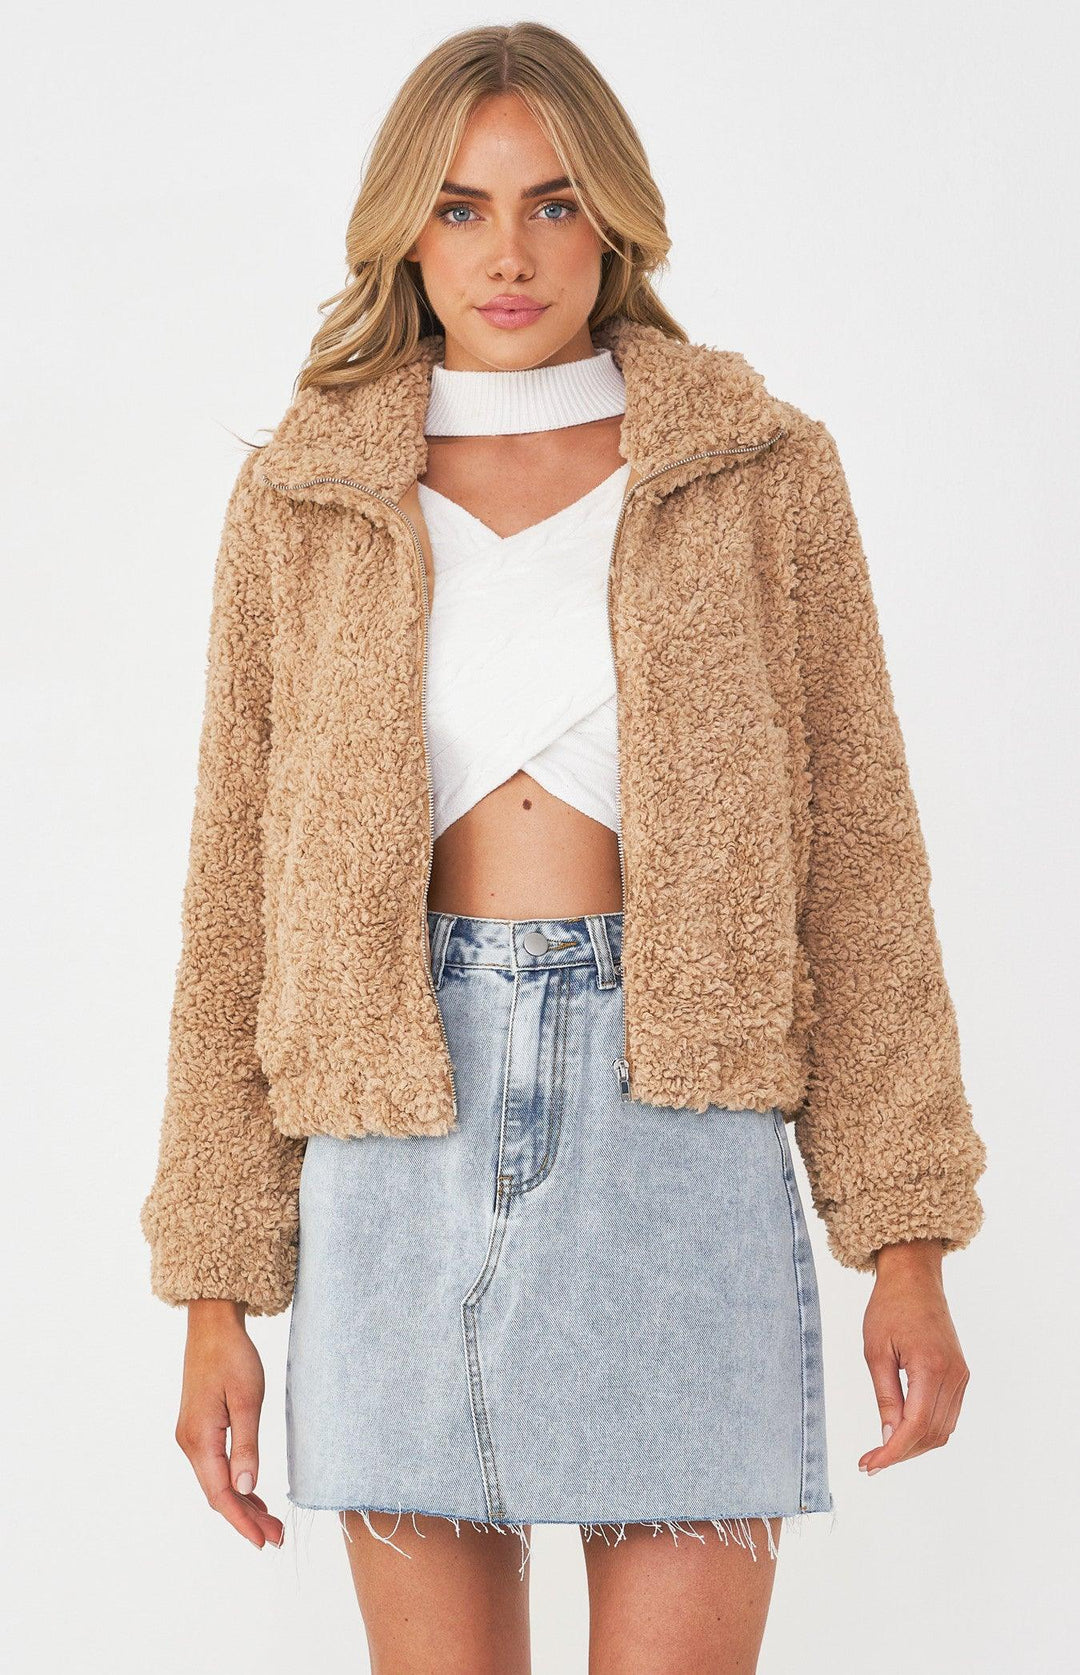 Here For You Teddy Jacket - Camel Outerwear